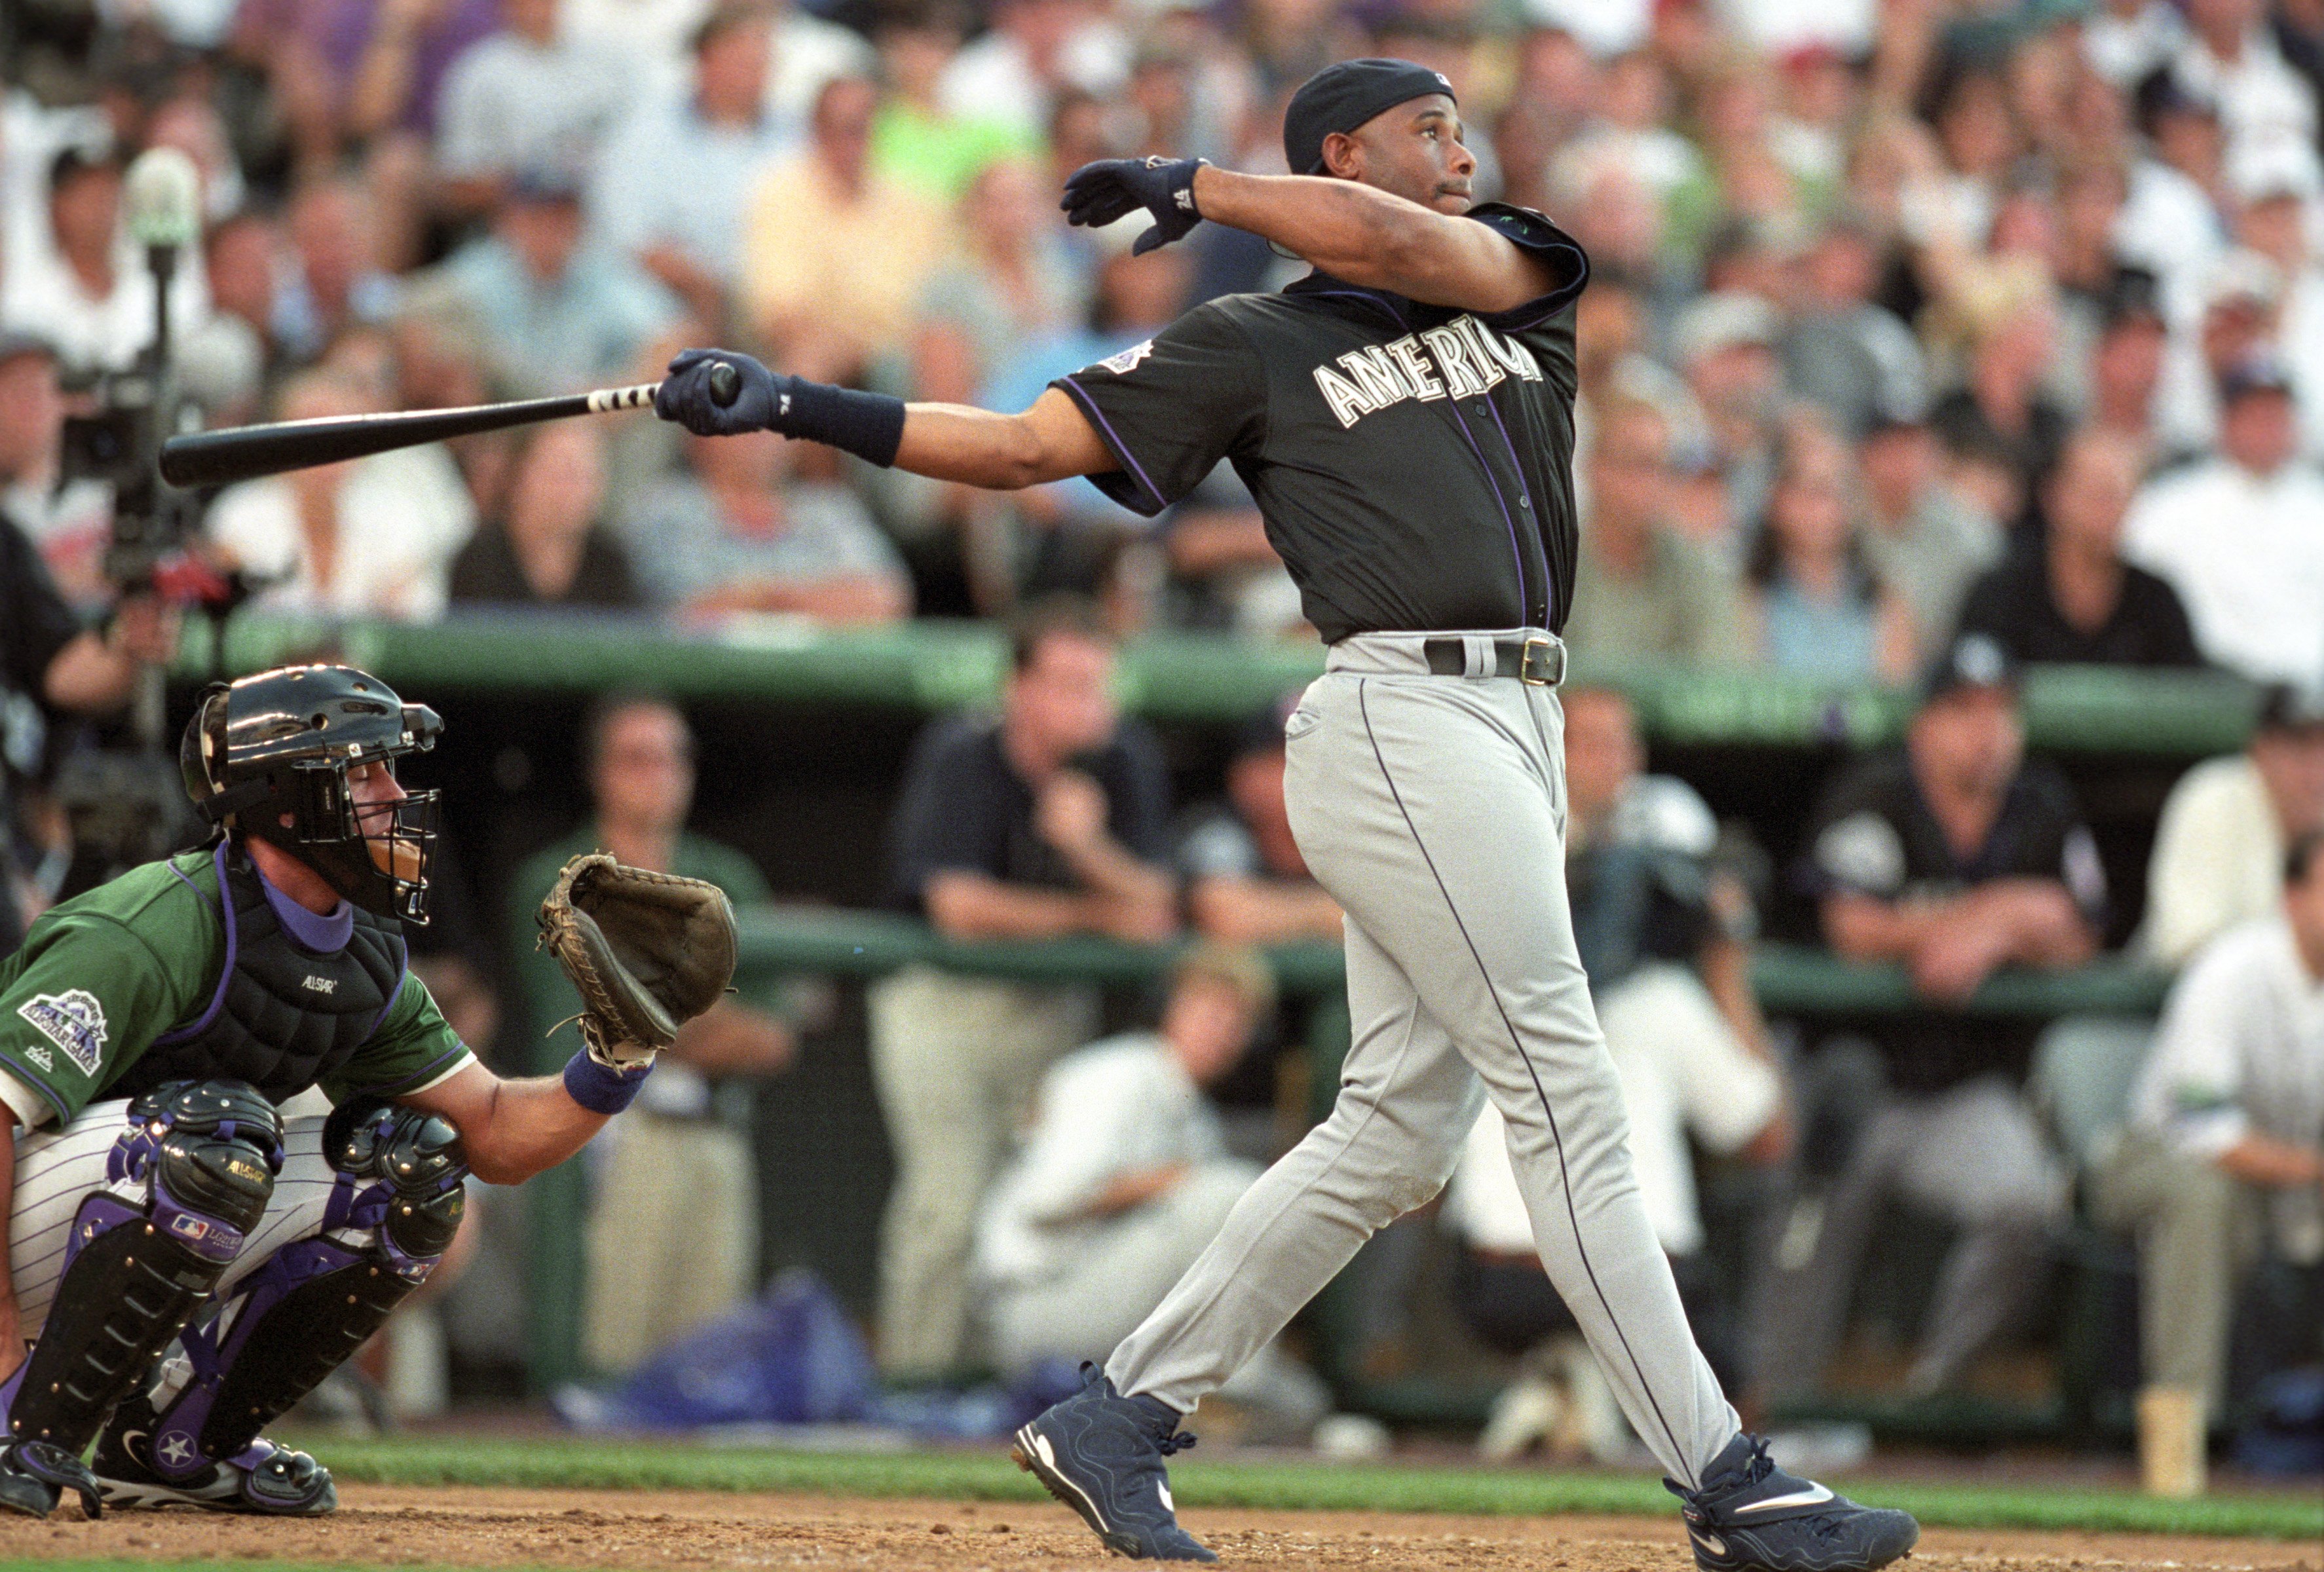 Ken Griffey Jr. should have been unanimously selected to the Hall